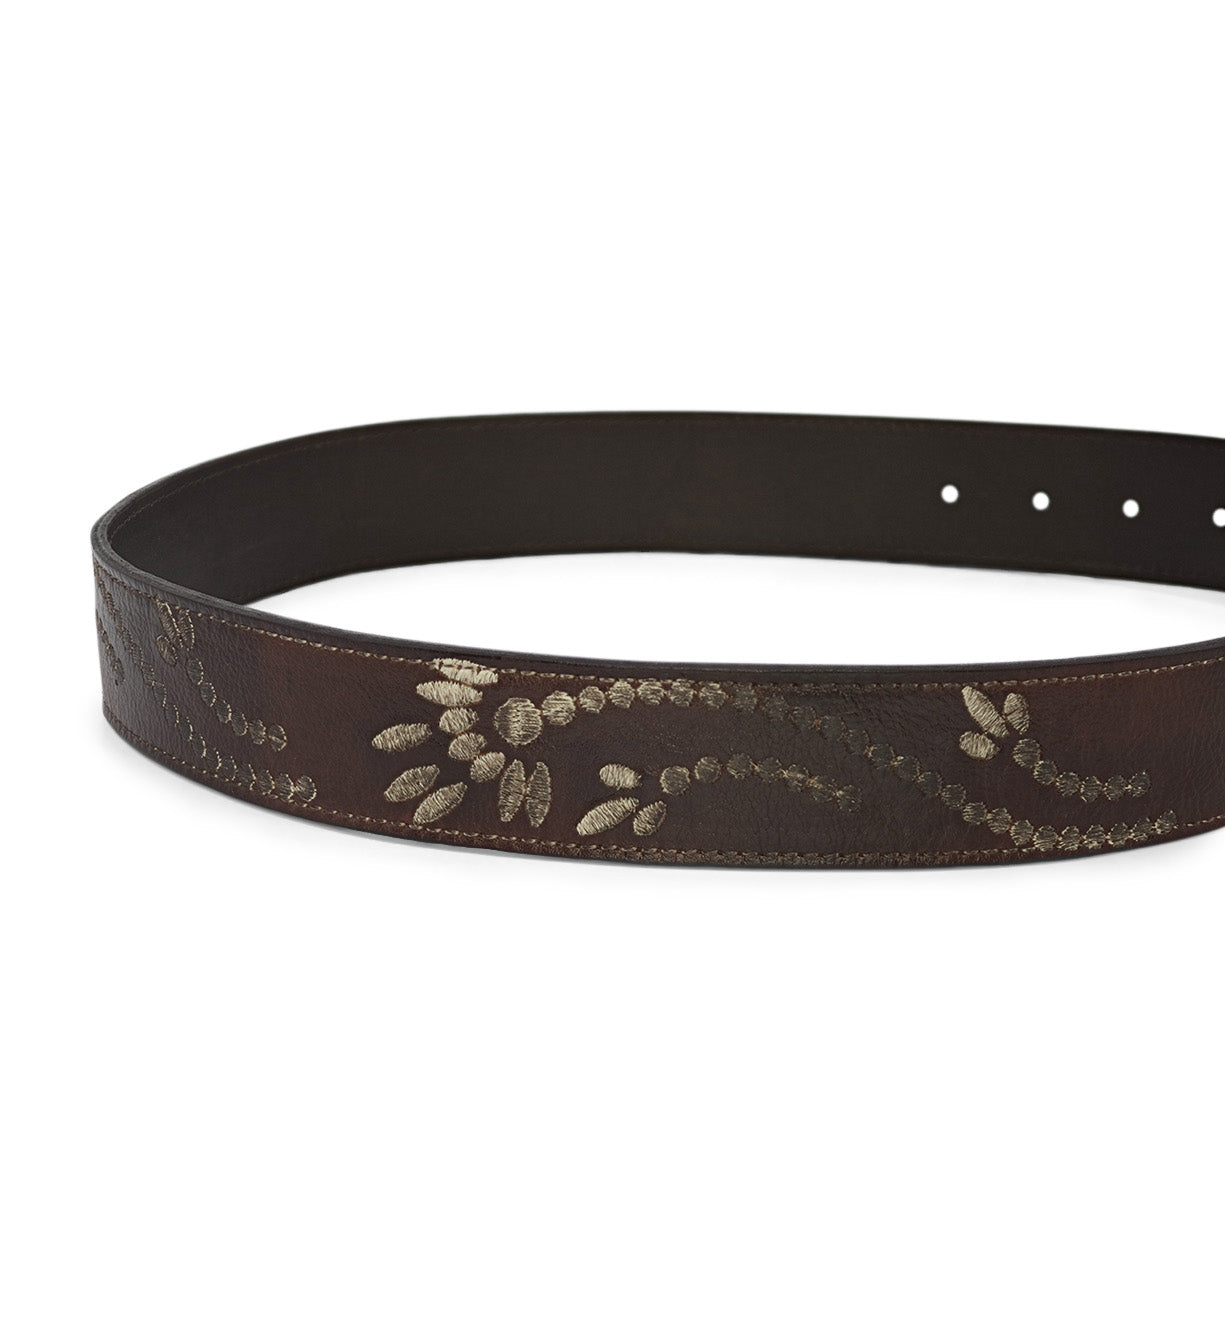 A Mohawk brown leather belt with a floral design on it, made by Bed Stu.